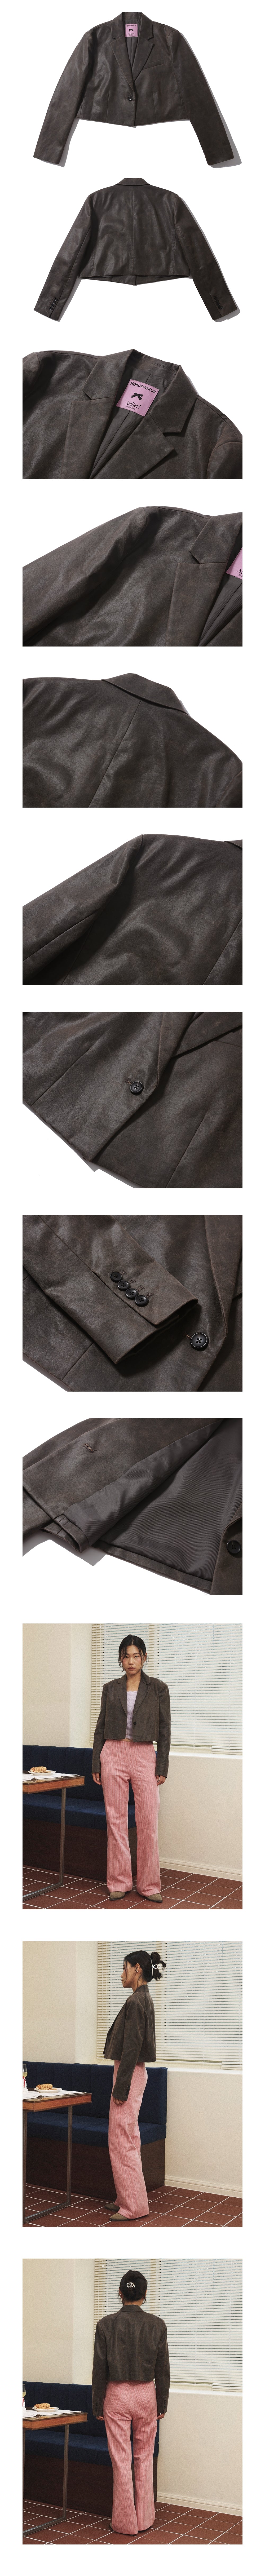 Cotton crack eco leather jacket / Brown